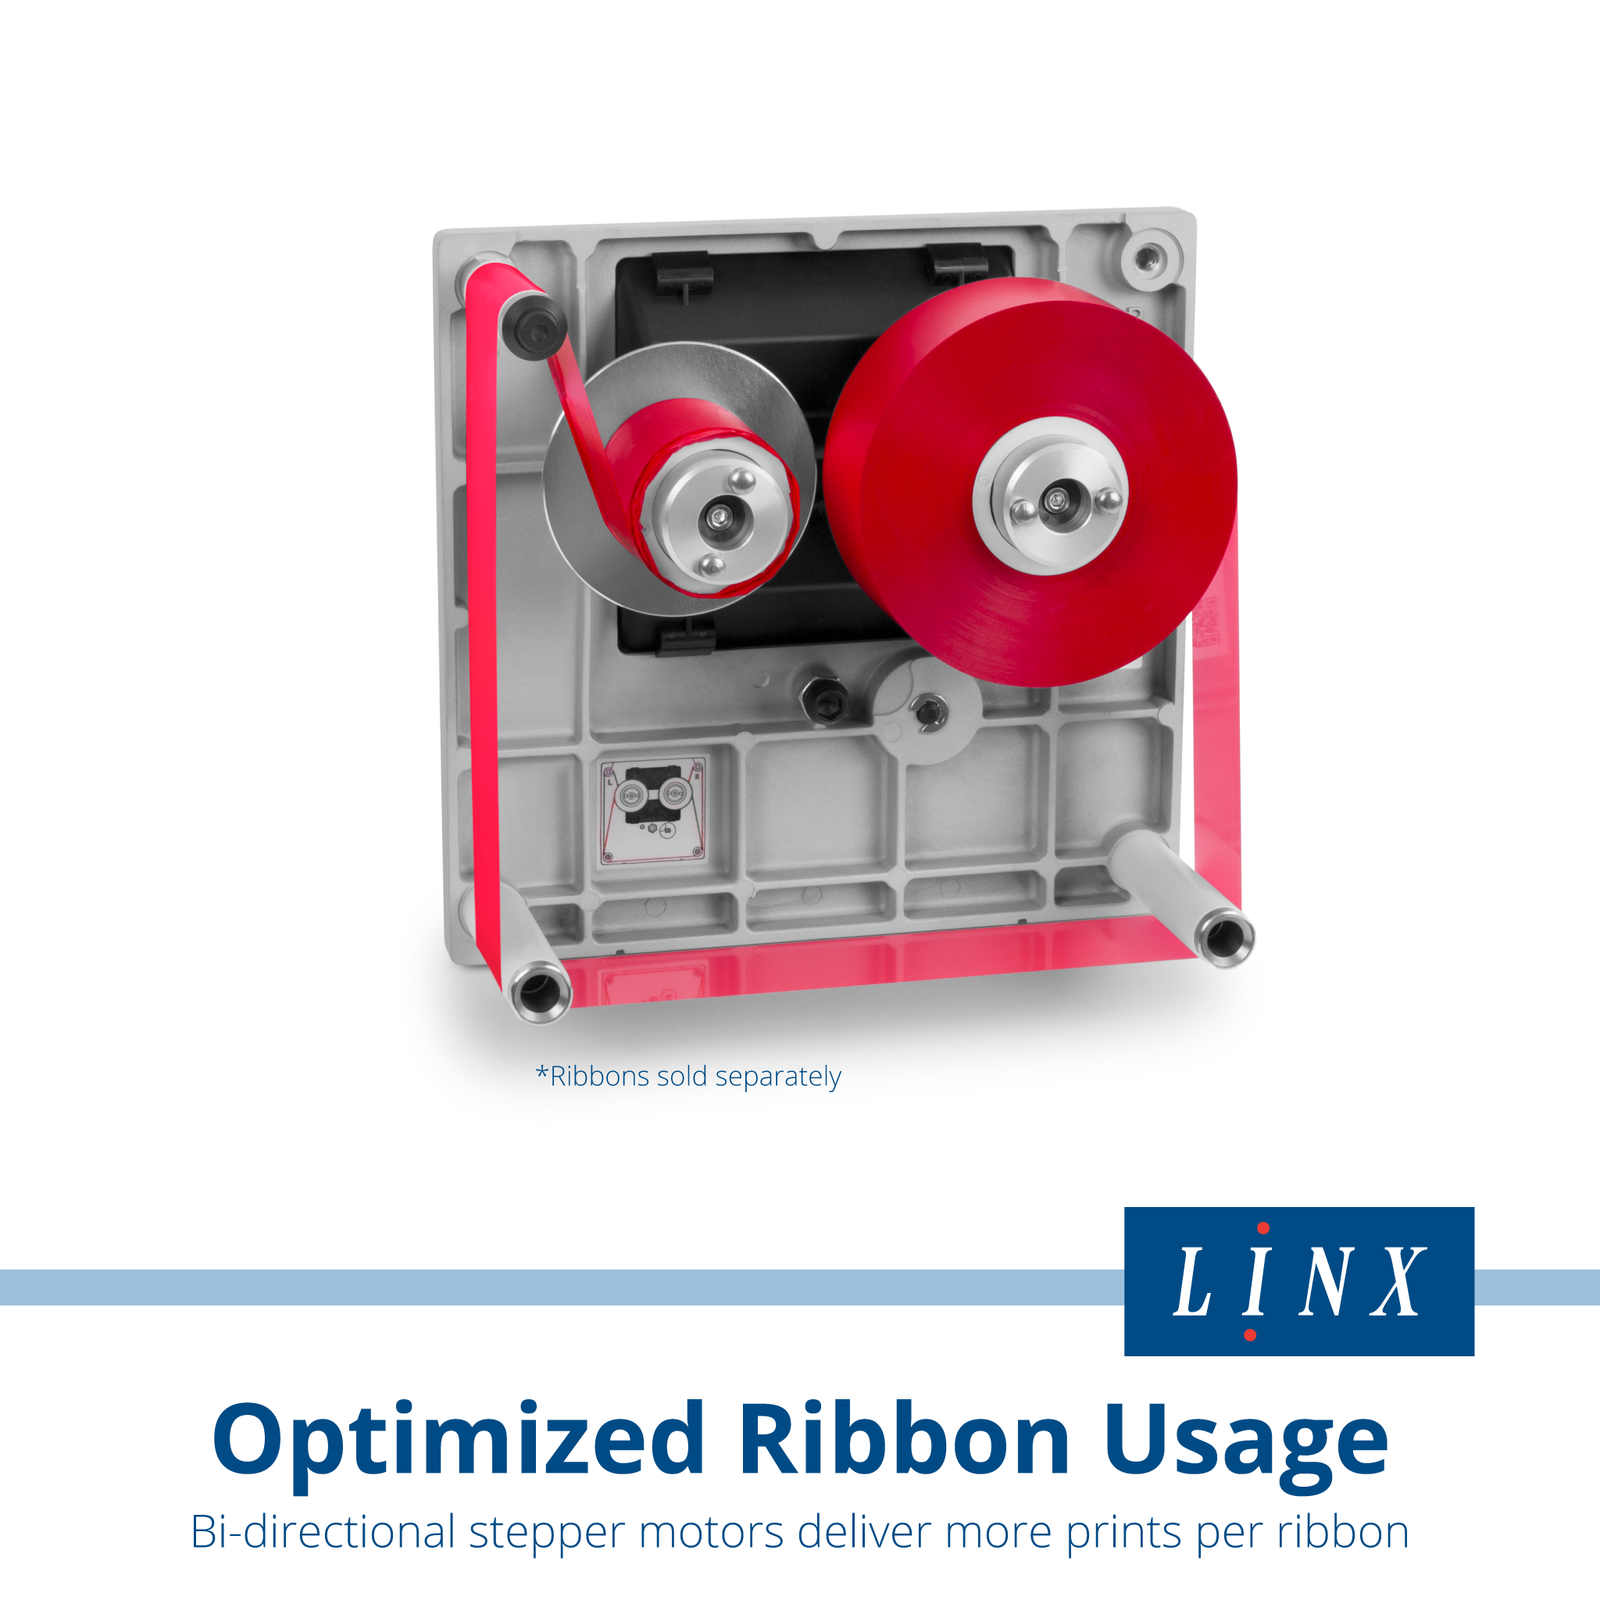 Close up of the red ribbon cartridge used by the LINX TT500 thermal transfer over printer for narrow format. Text reads: Optimized ribbons usage, bi-directional stepper motors deliver more prints per ribbon. Ribbons sold separately, 